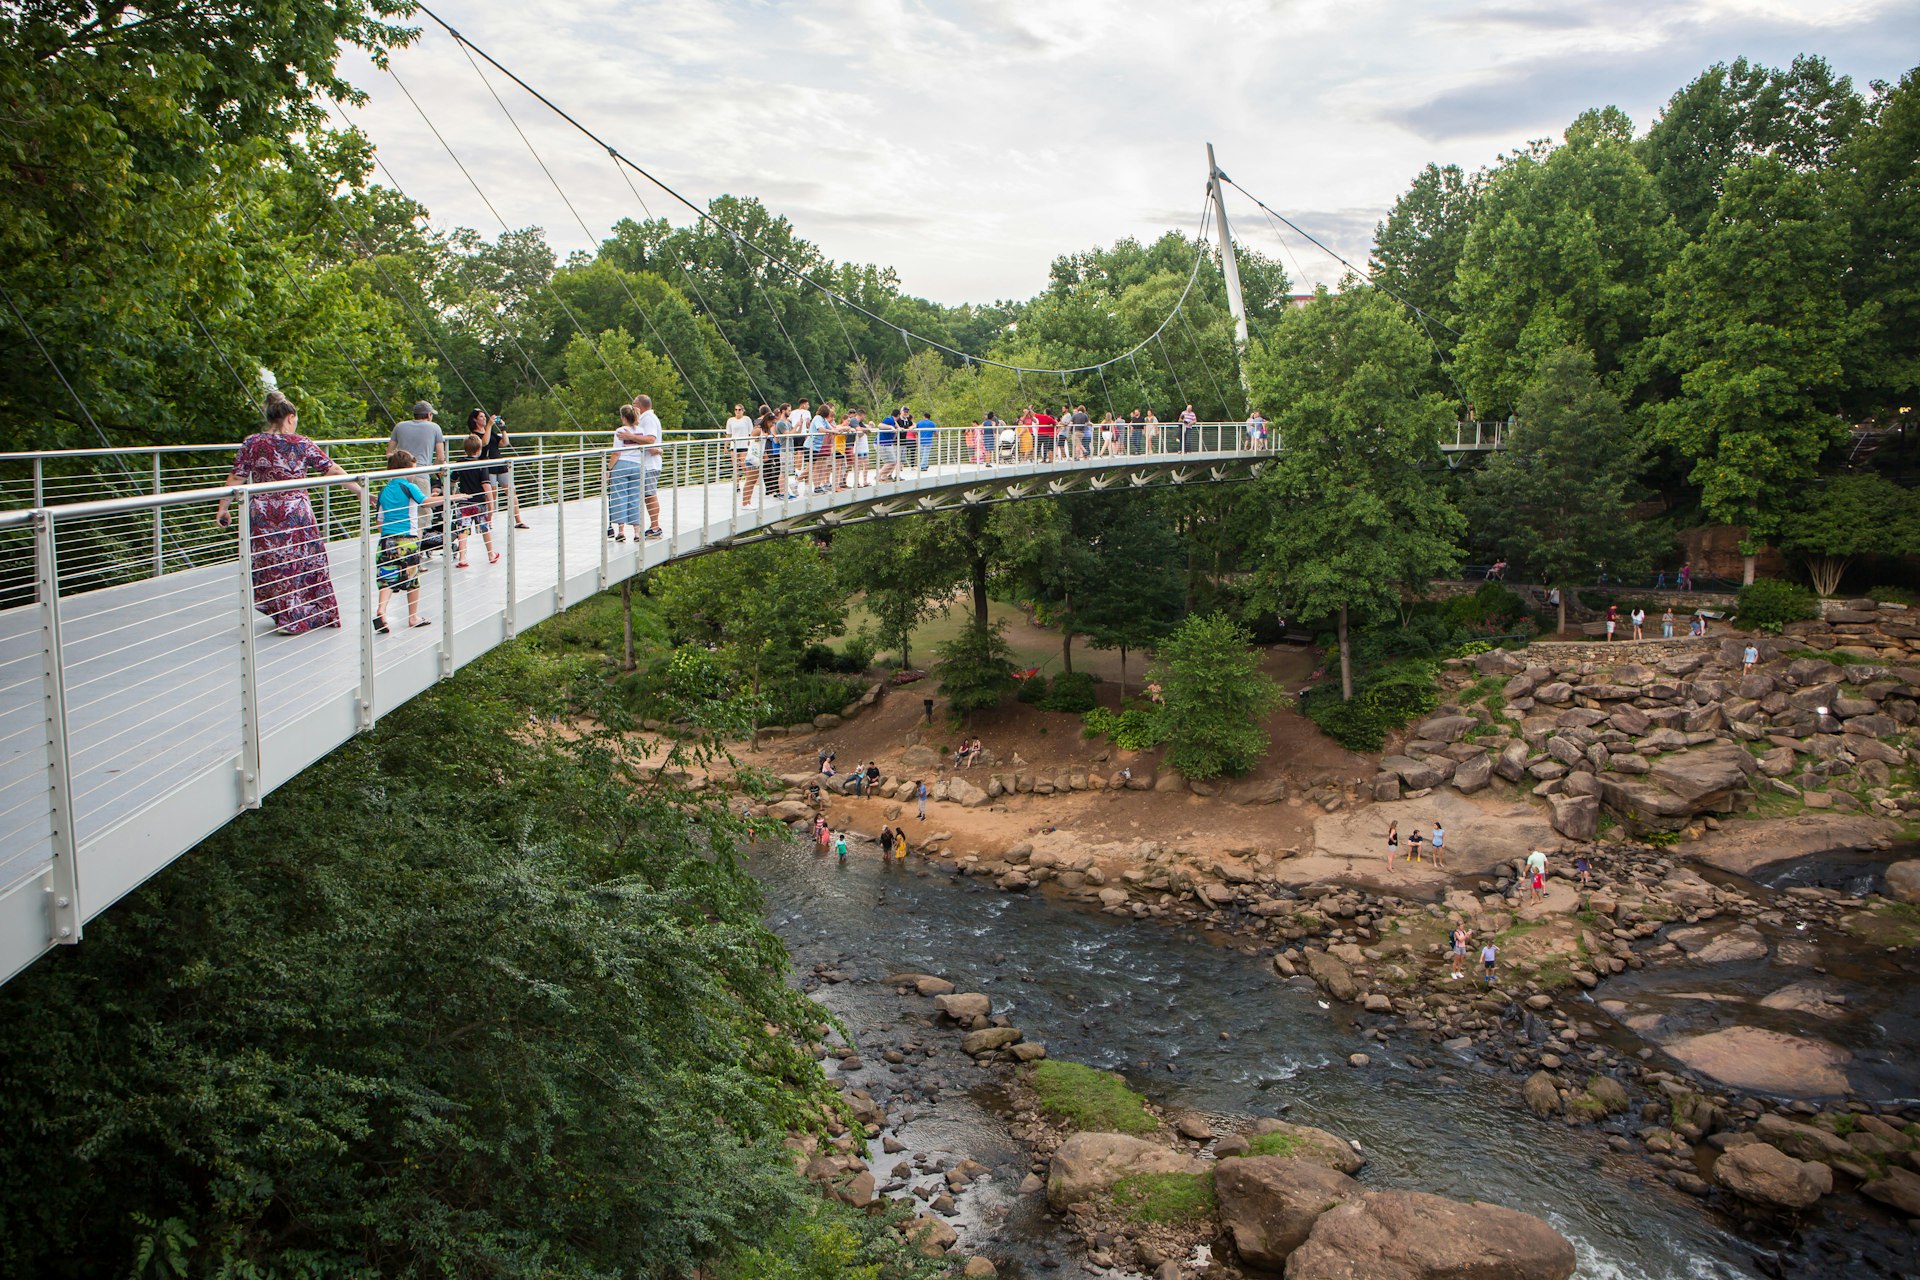 Visitors to Falls Park linger on Liberty Bridge overlooking the Reedy River waterfalls